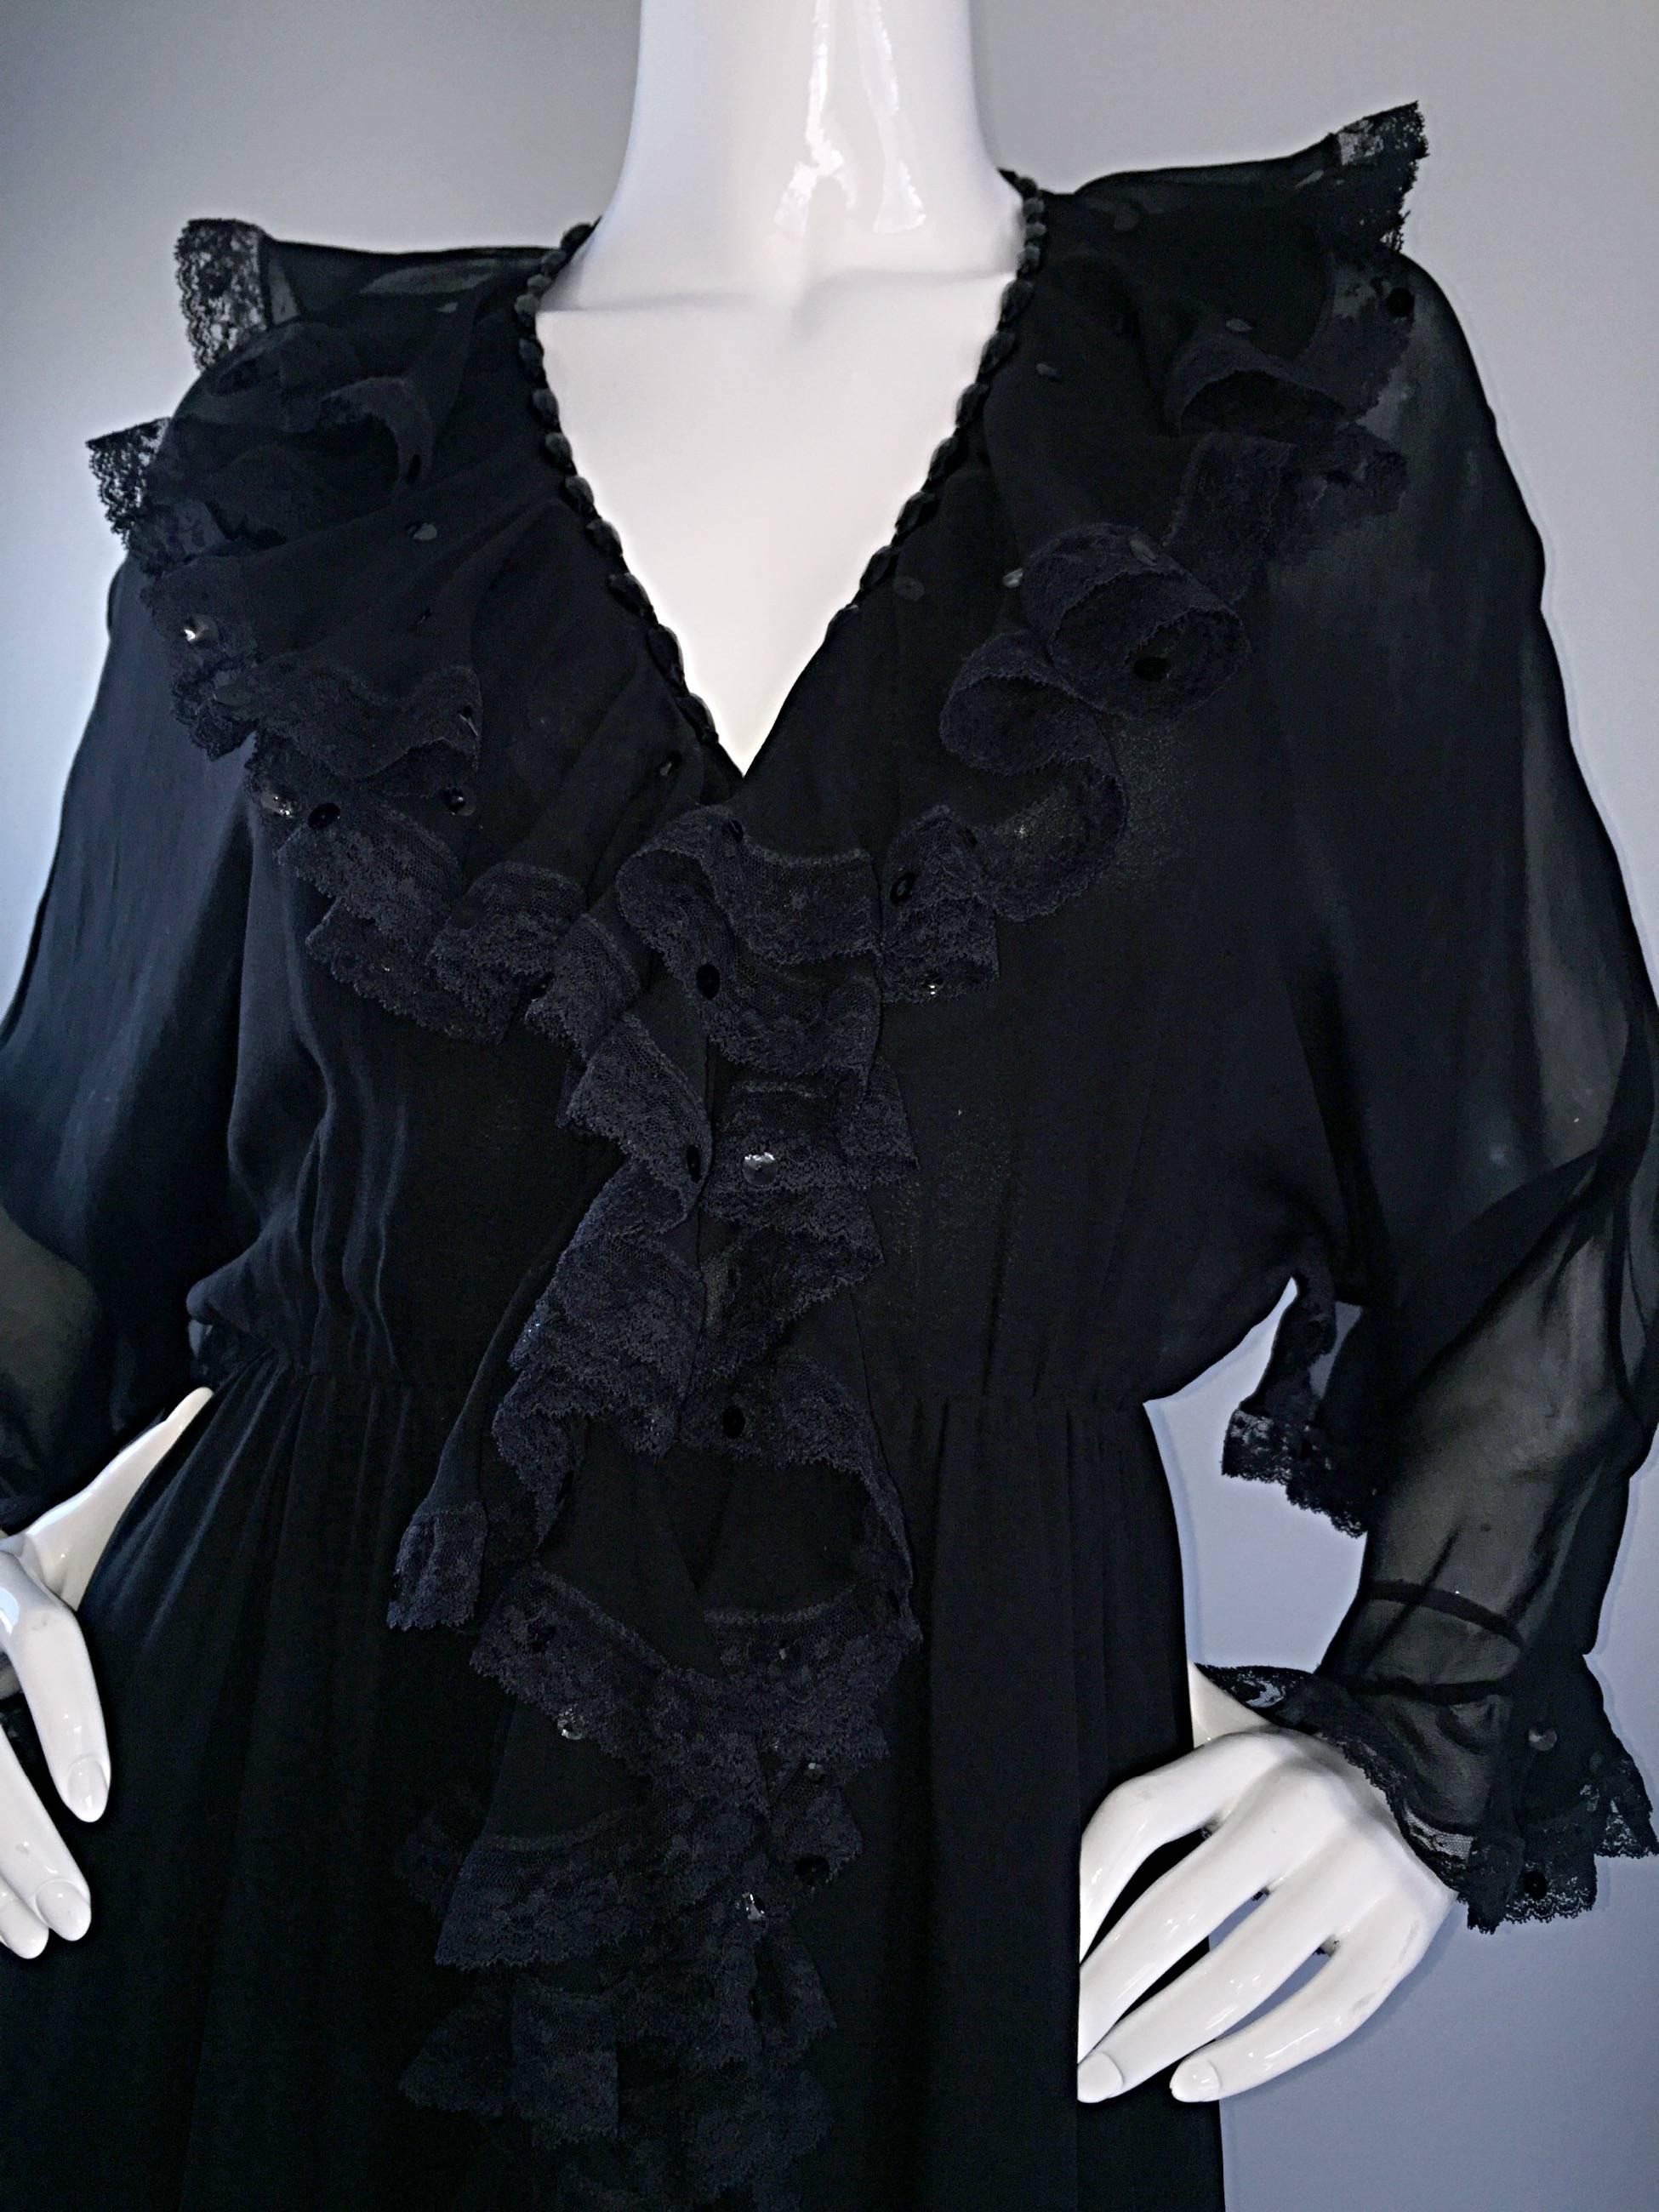 Incredible Vintage Bill Blass Black Silk Chiffon Ruffled Sequin Boho 70s Dress In Excellent Condition For Sale In San Diego, CA